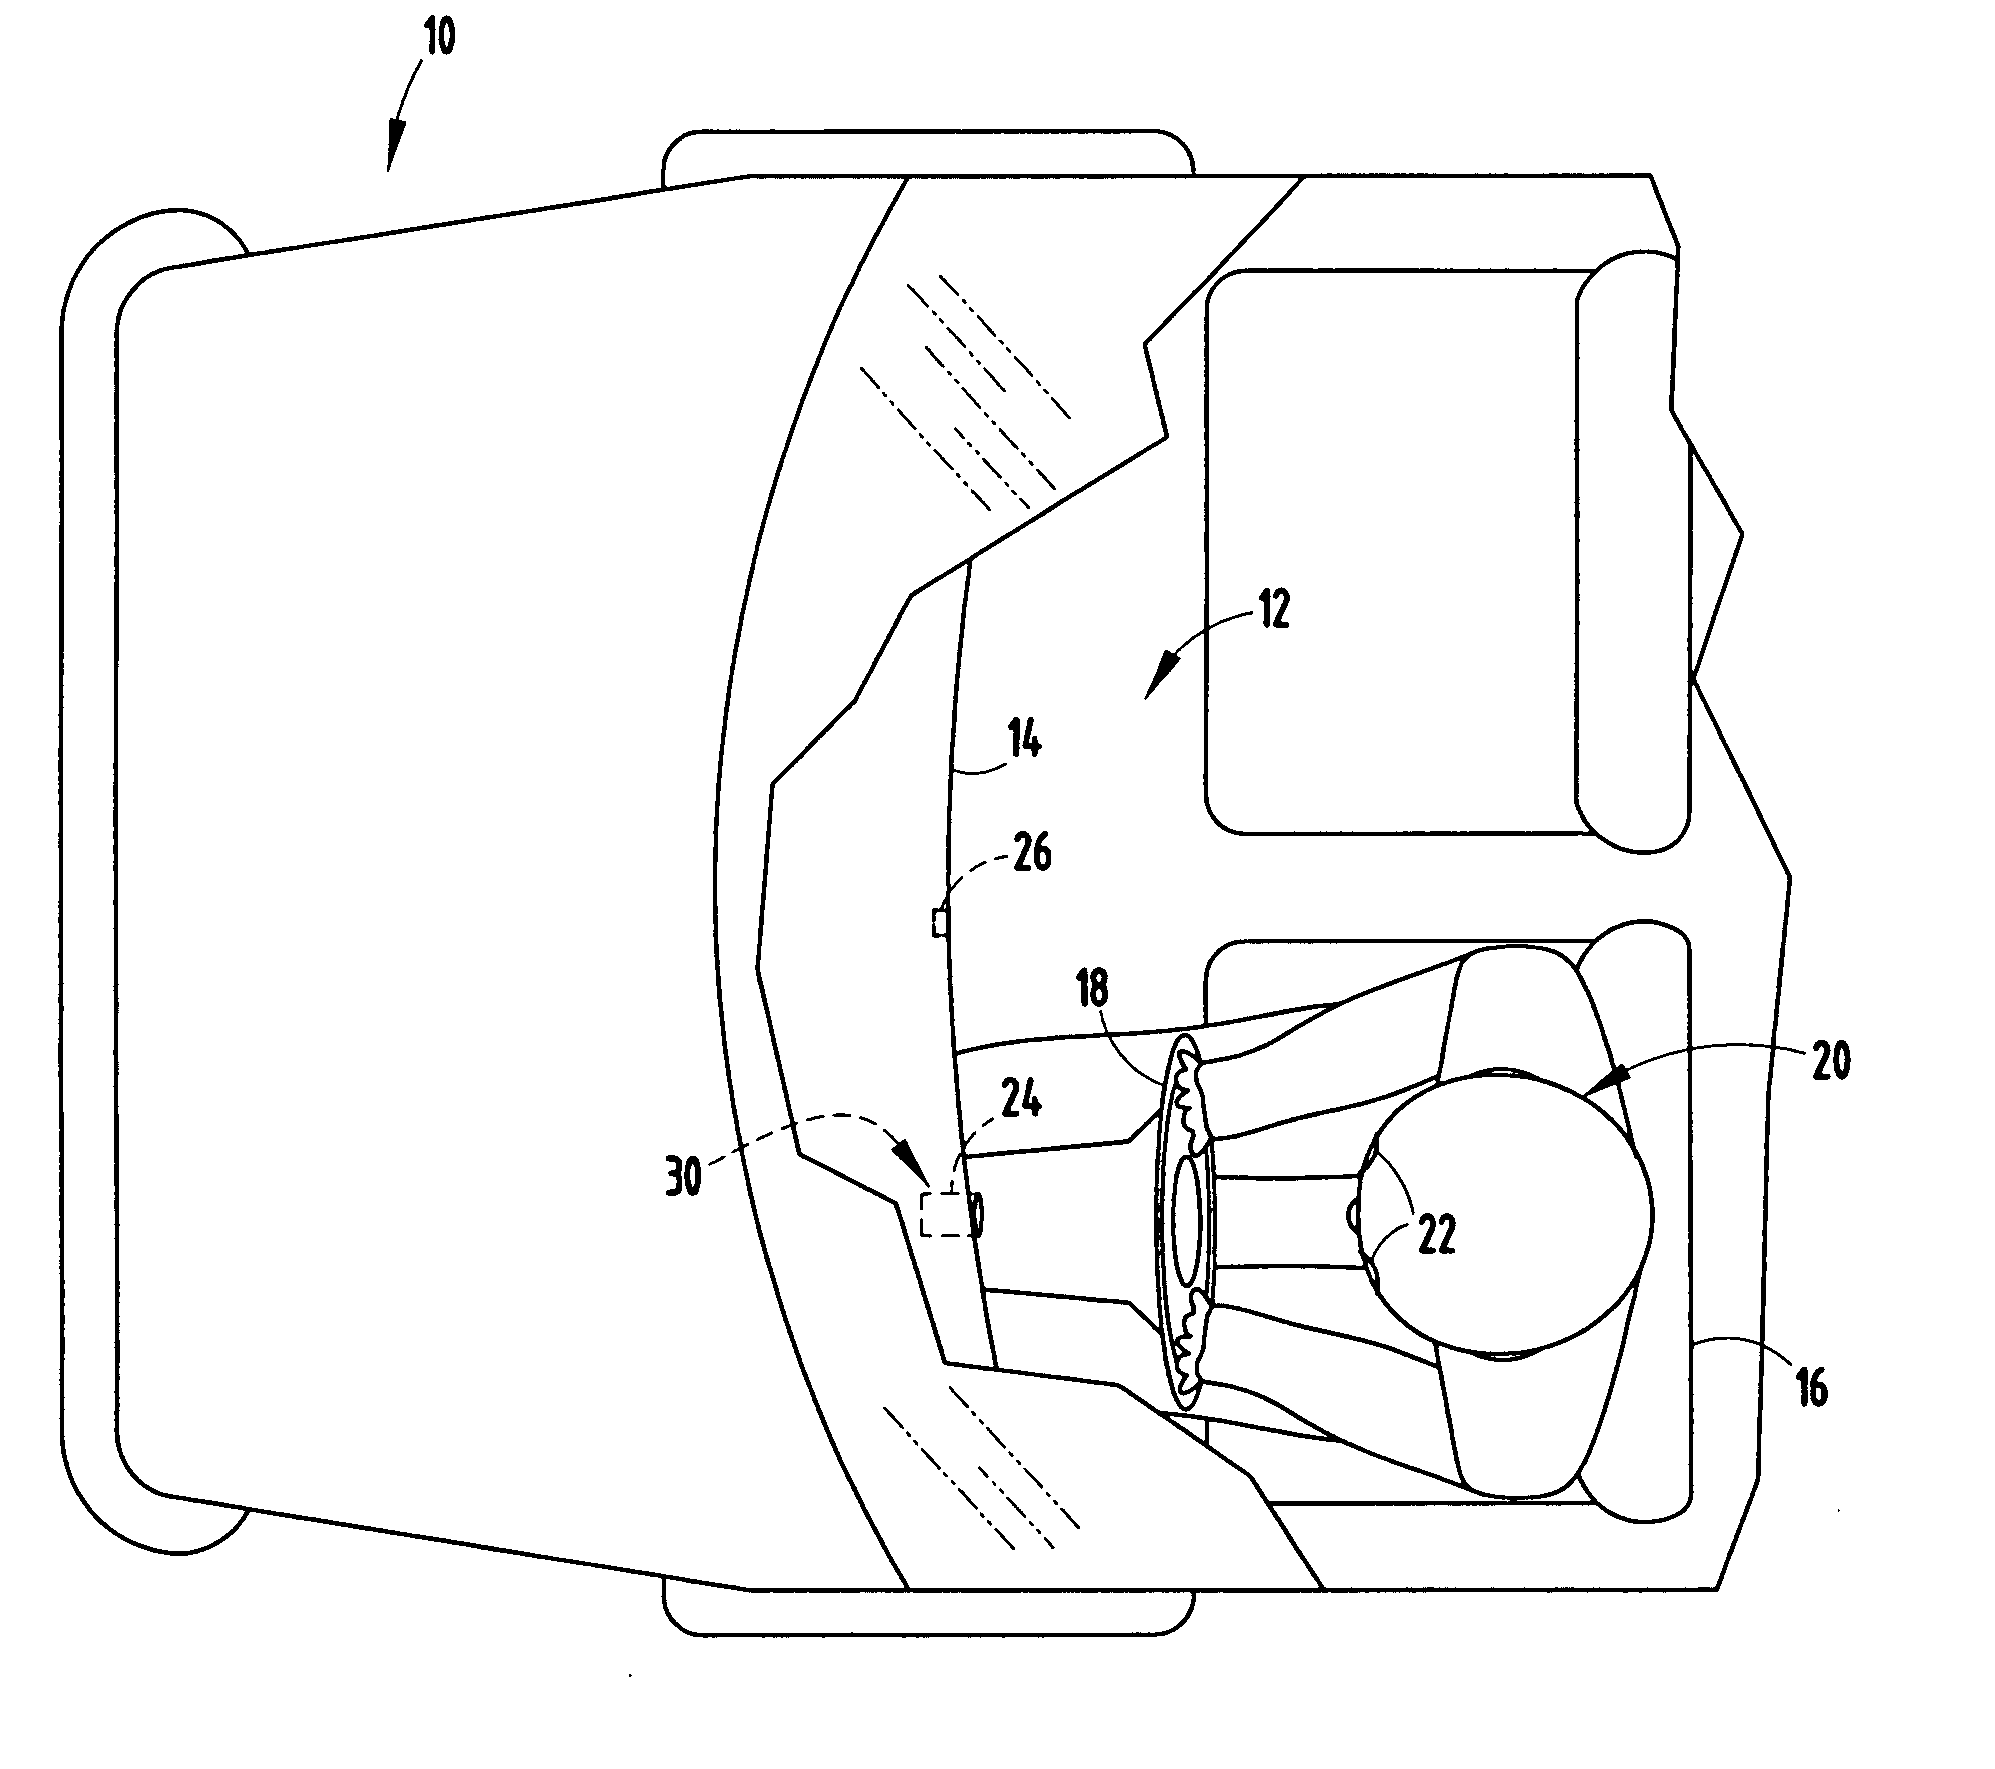 System and method of detecting eye closure based on line angles